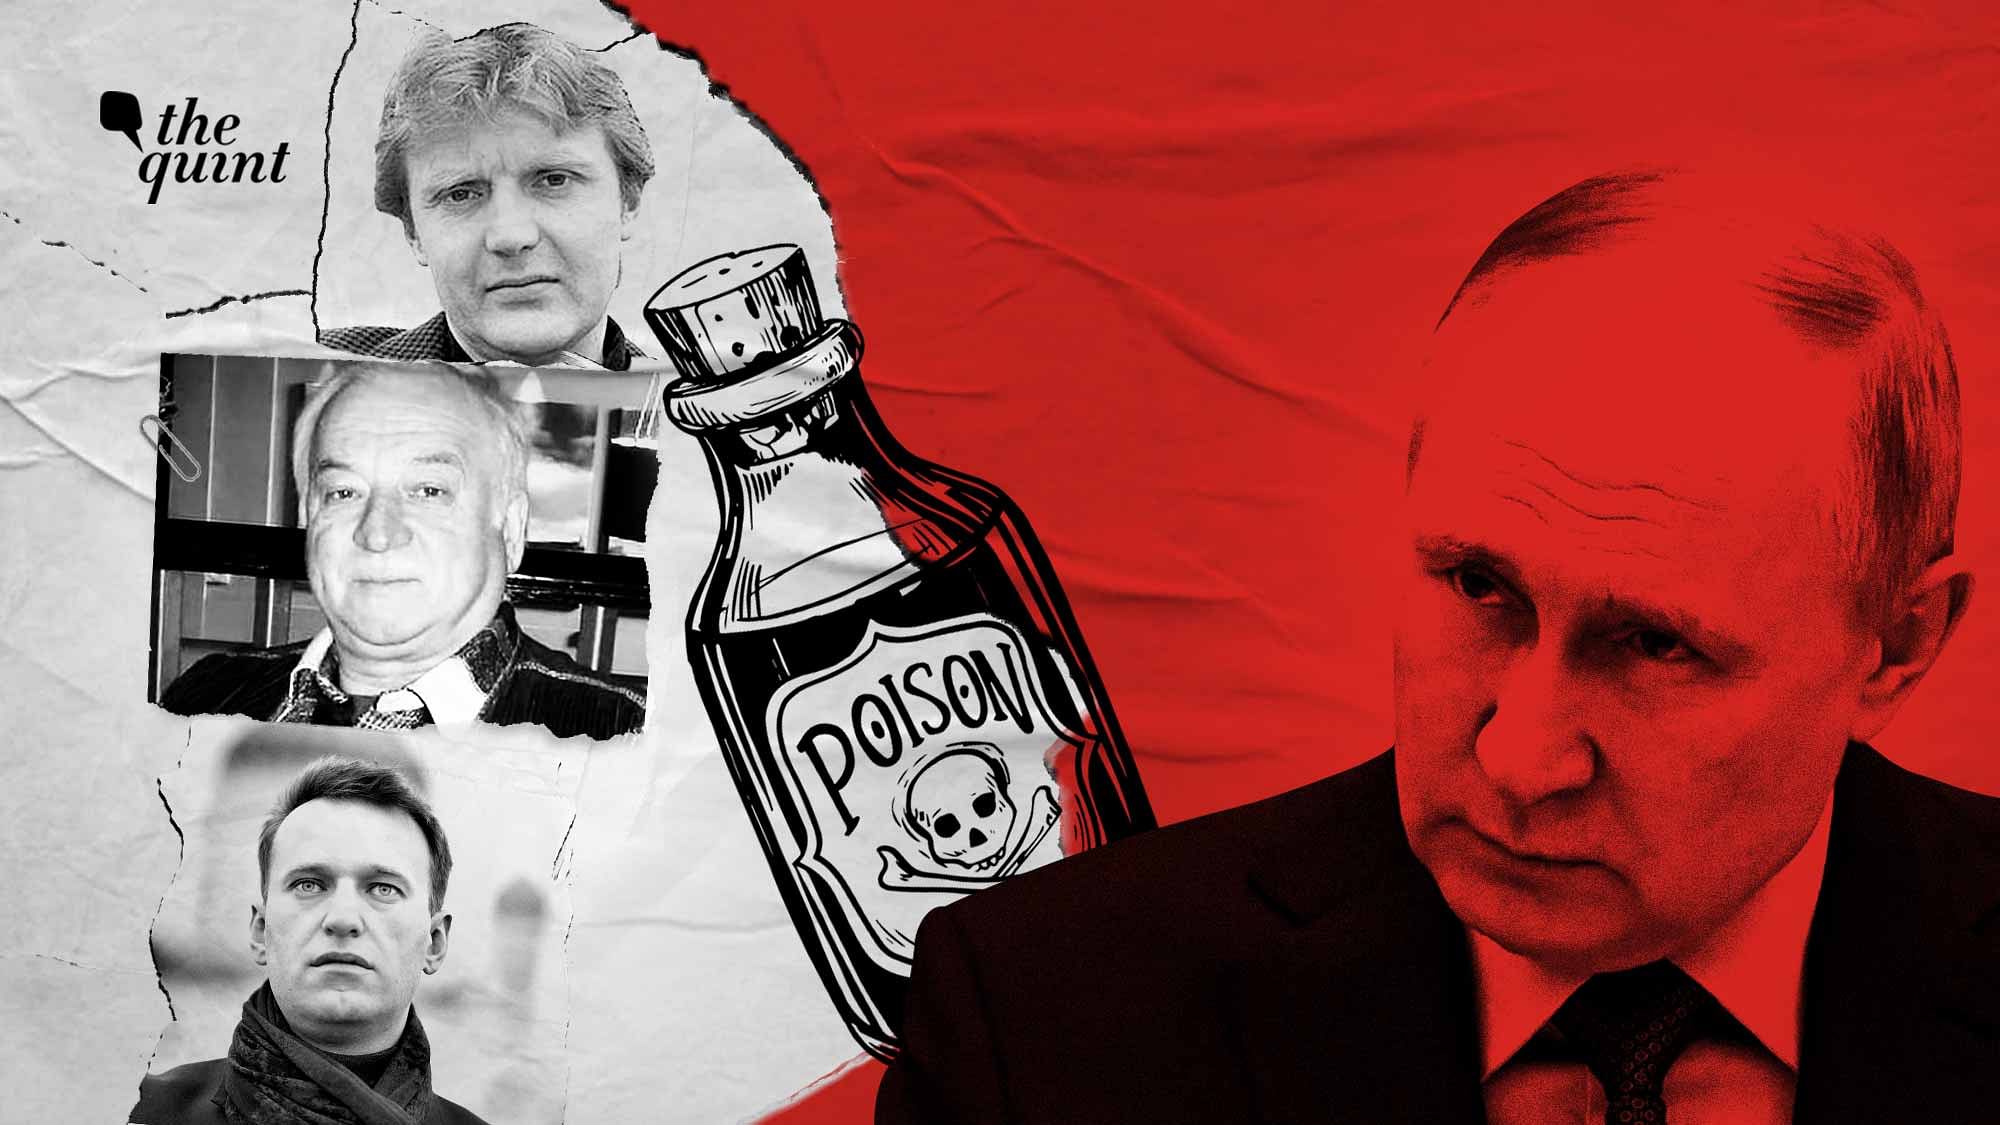 <div class="paragraphs"><p>Some of the Russia's poisoning targets in the past include Alexander Litvinenko (deceased), Sergei Skripal, and Alexei Navalny.&nbsp;</p></div>